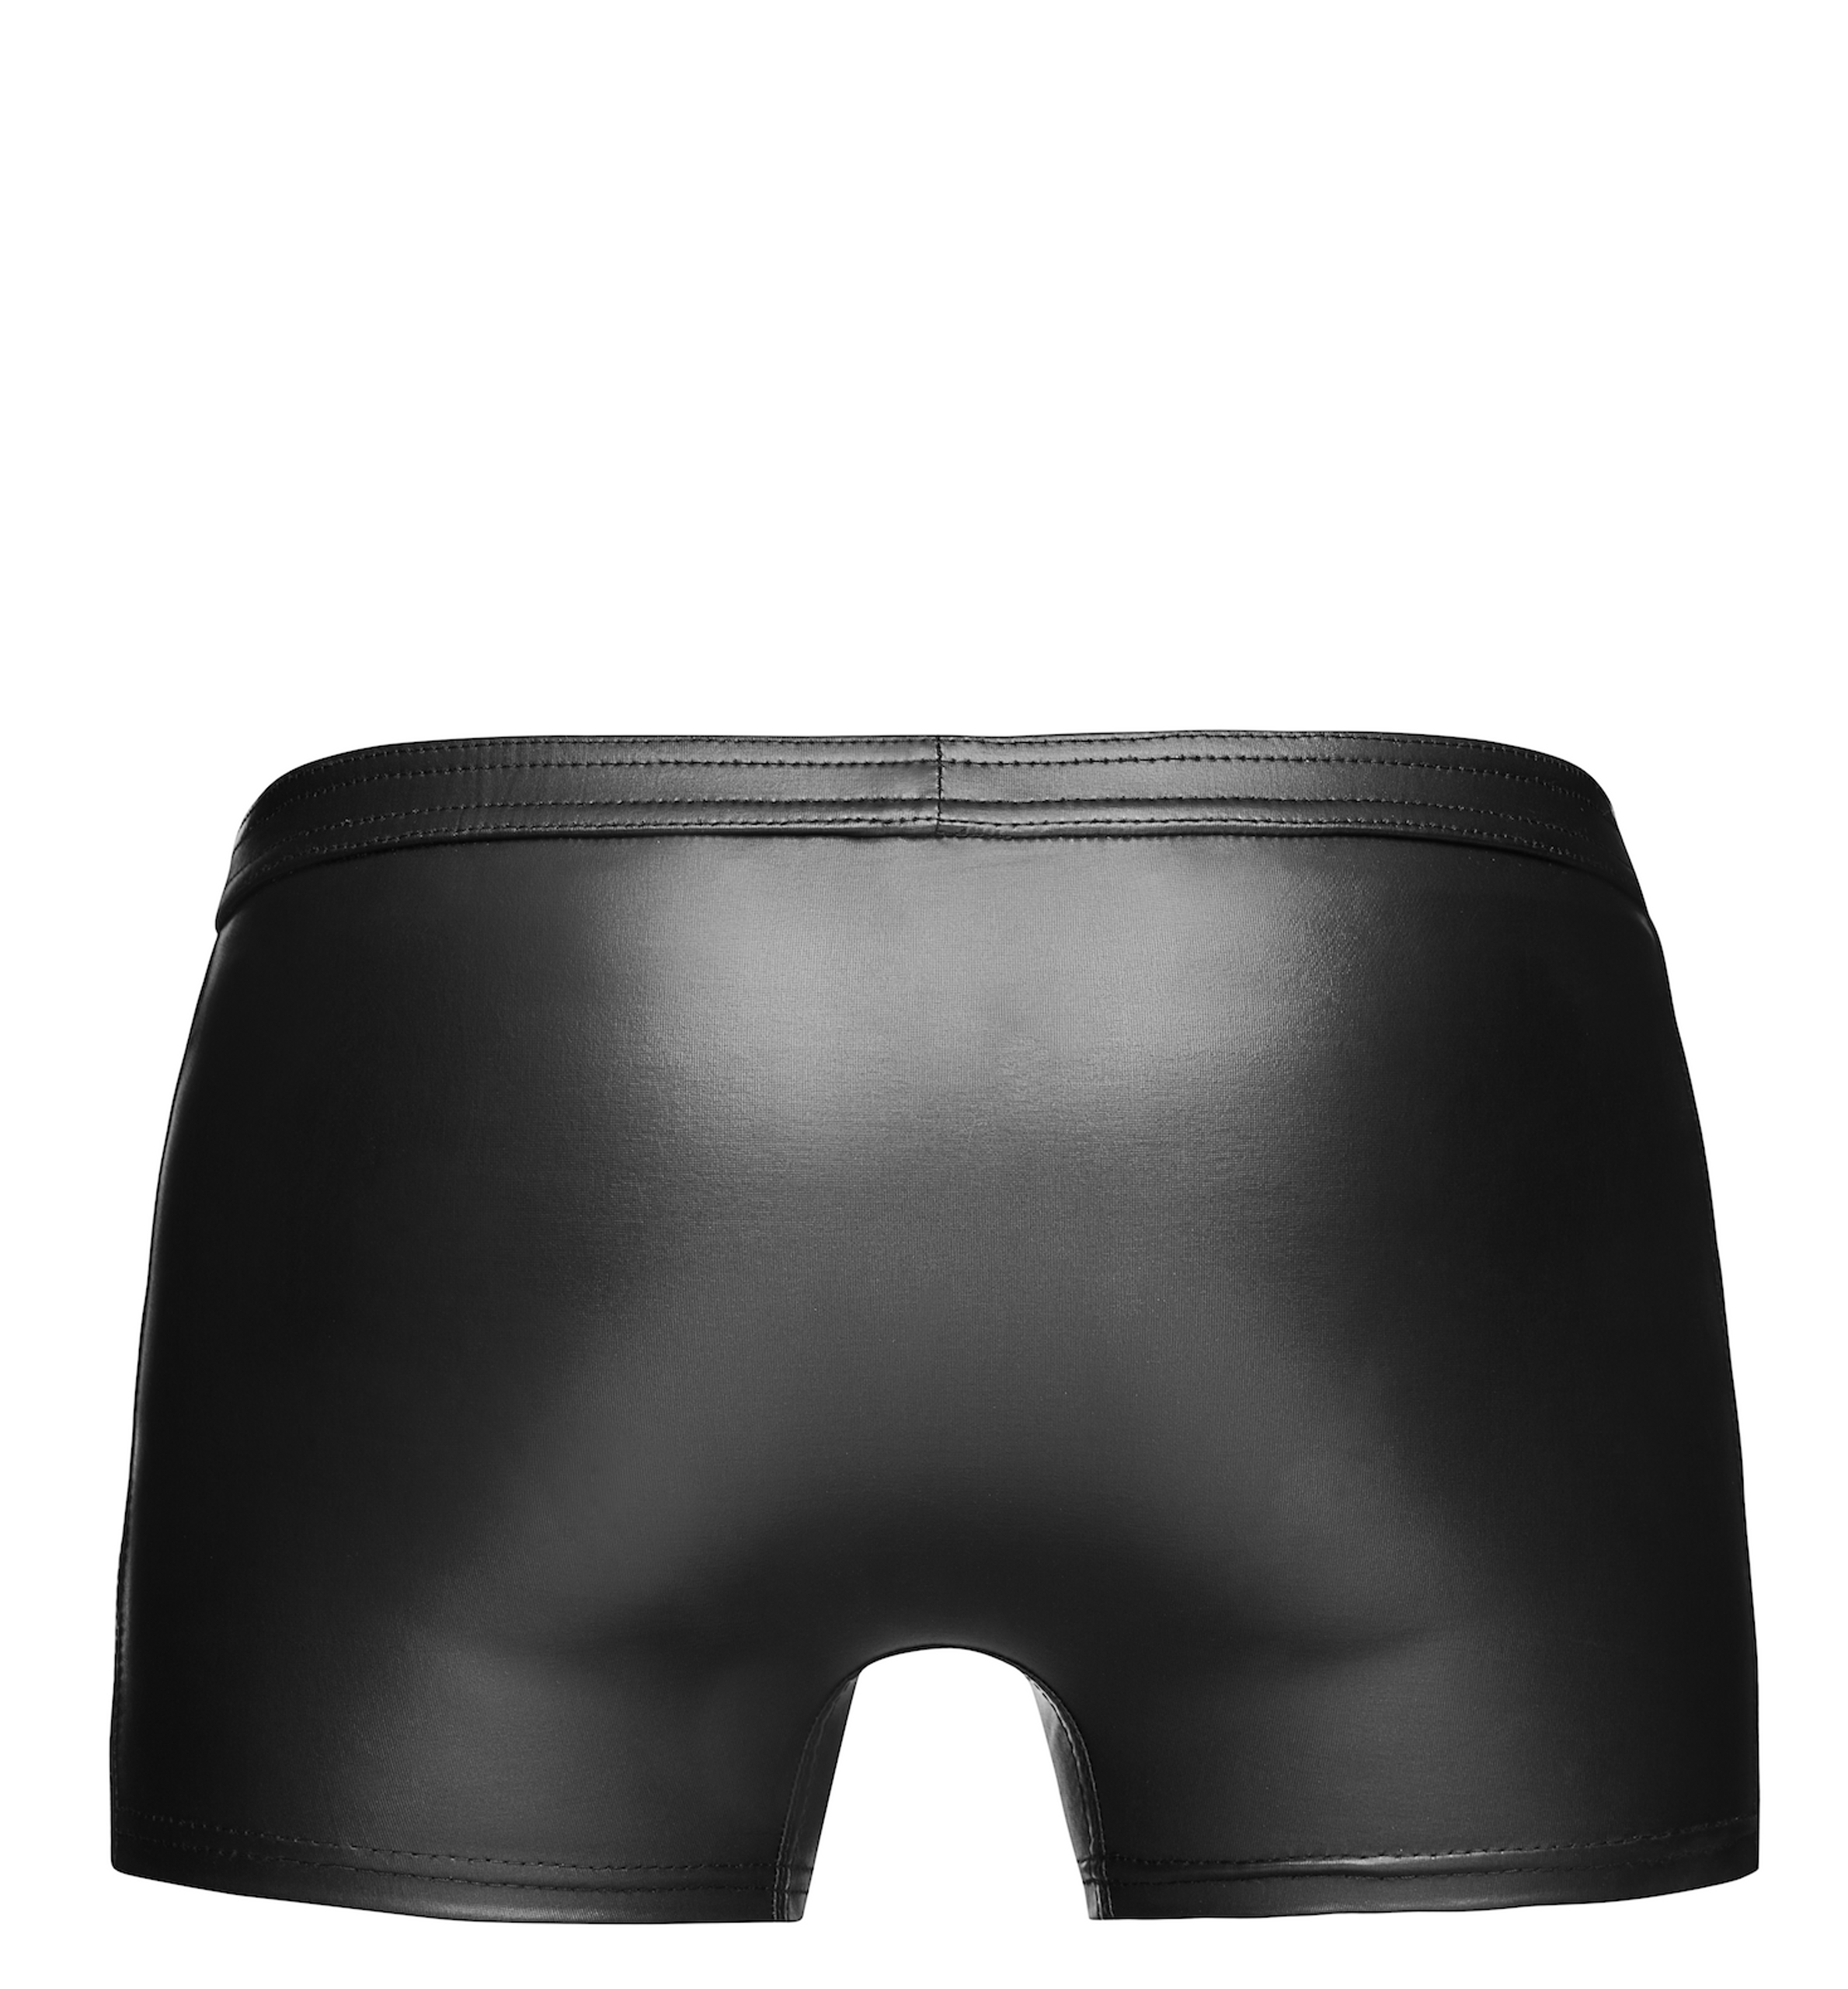 Noir Handmade H006 Sexy shorts with hot details